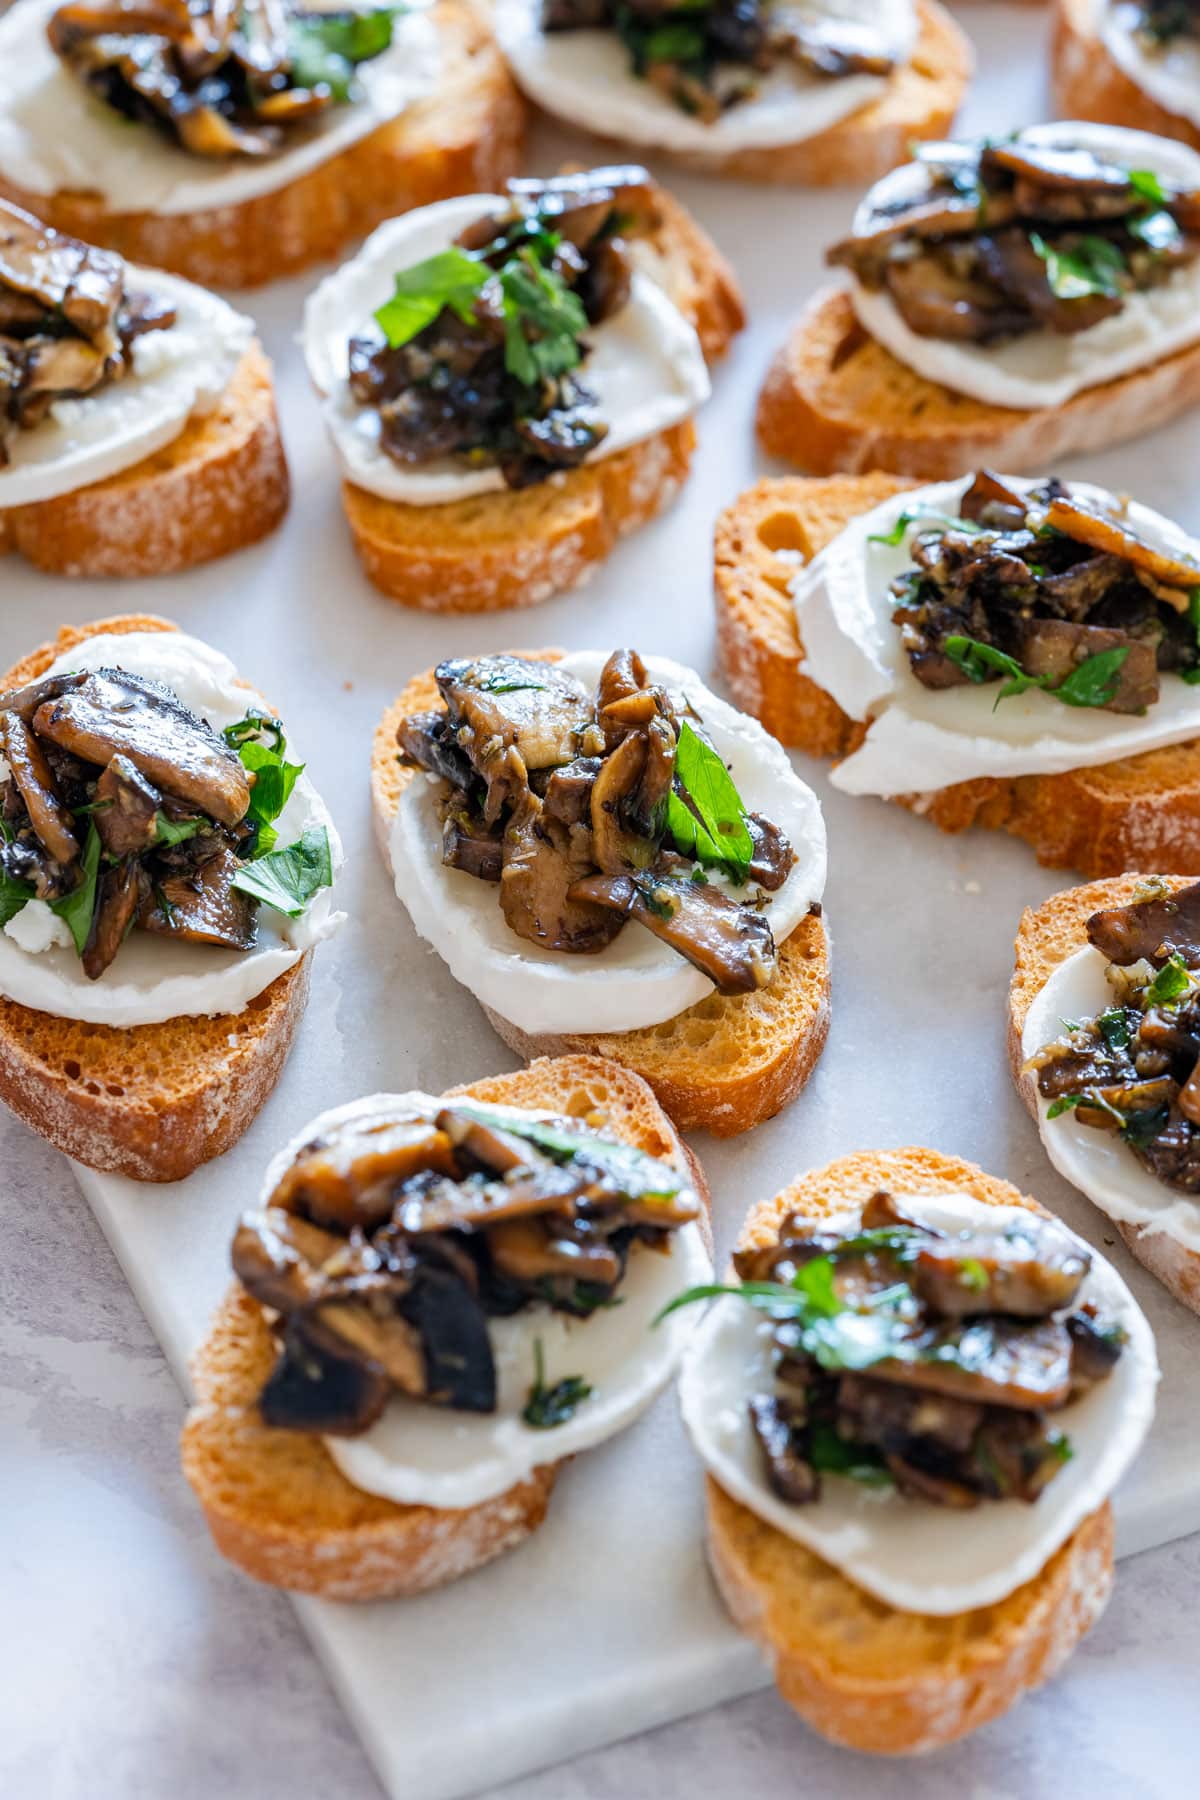 Selection of toasted crostini with goat cheese and mushroom.